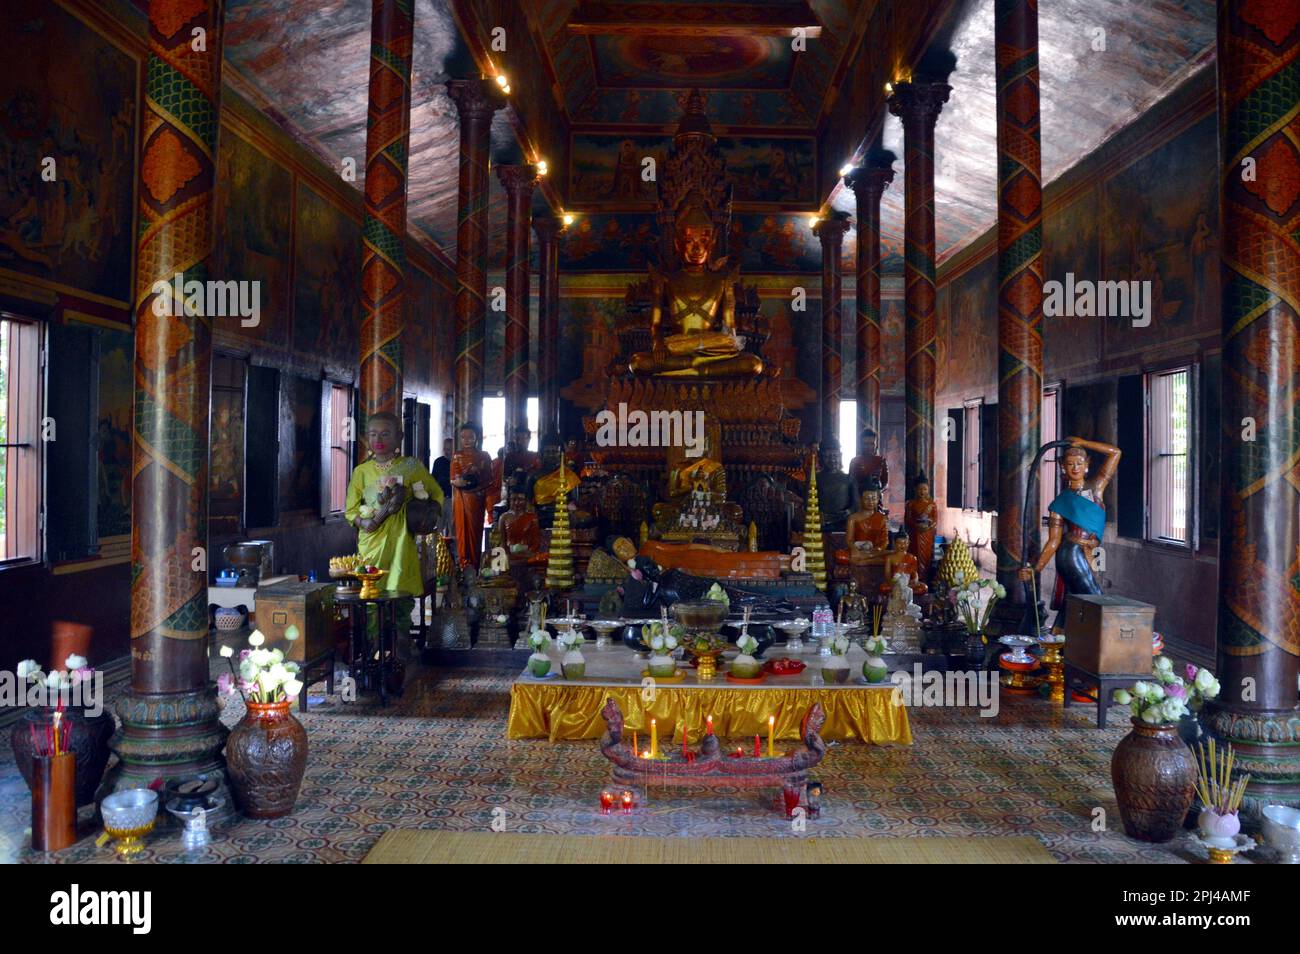 Cambodia, Phnom Penh:  Wat Phnom, founded in 1373, according to legend to house four statues of Buddha rescued from the Mekong River by Madame Penh. Stock Photo